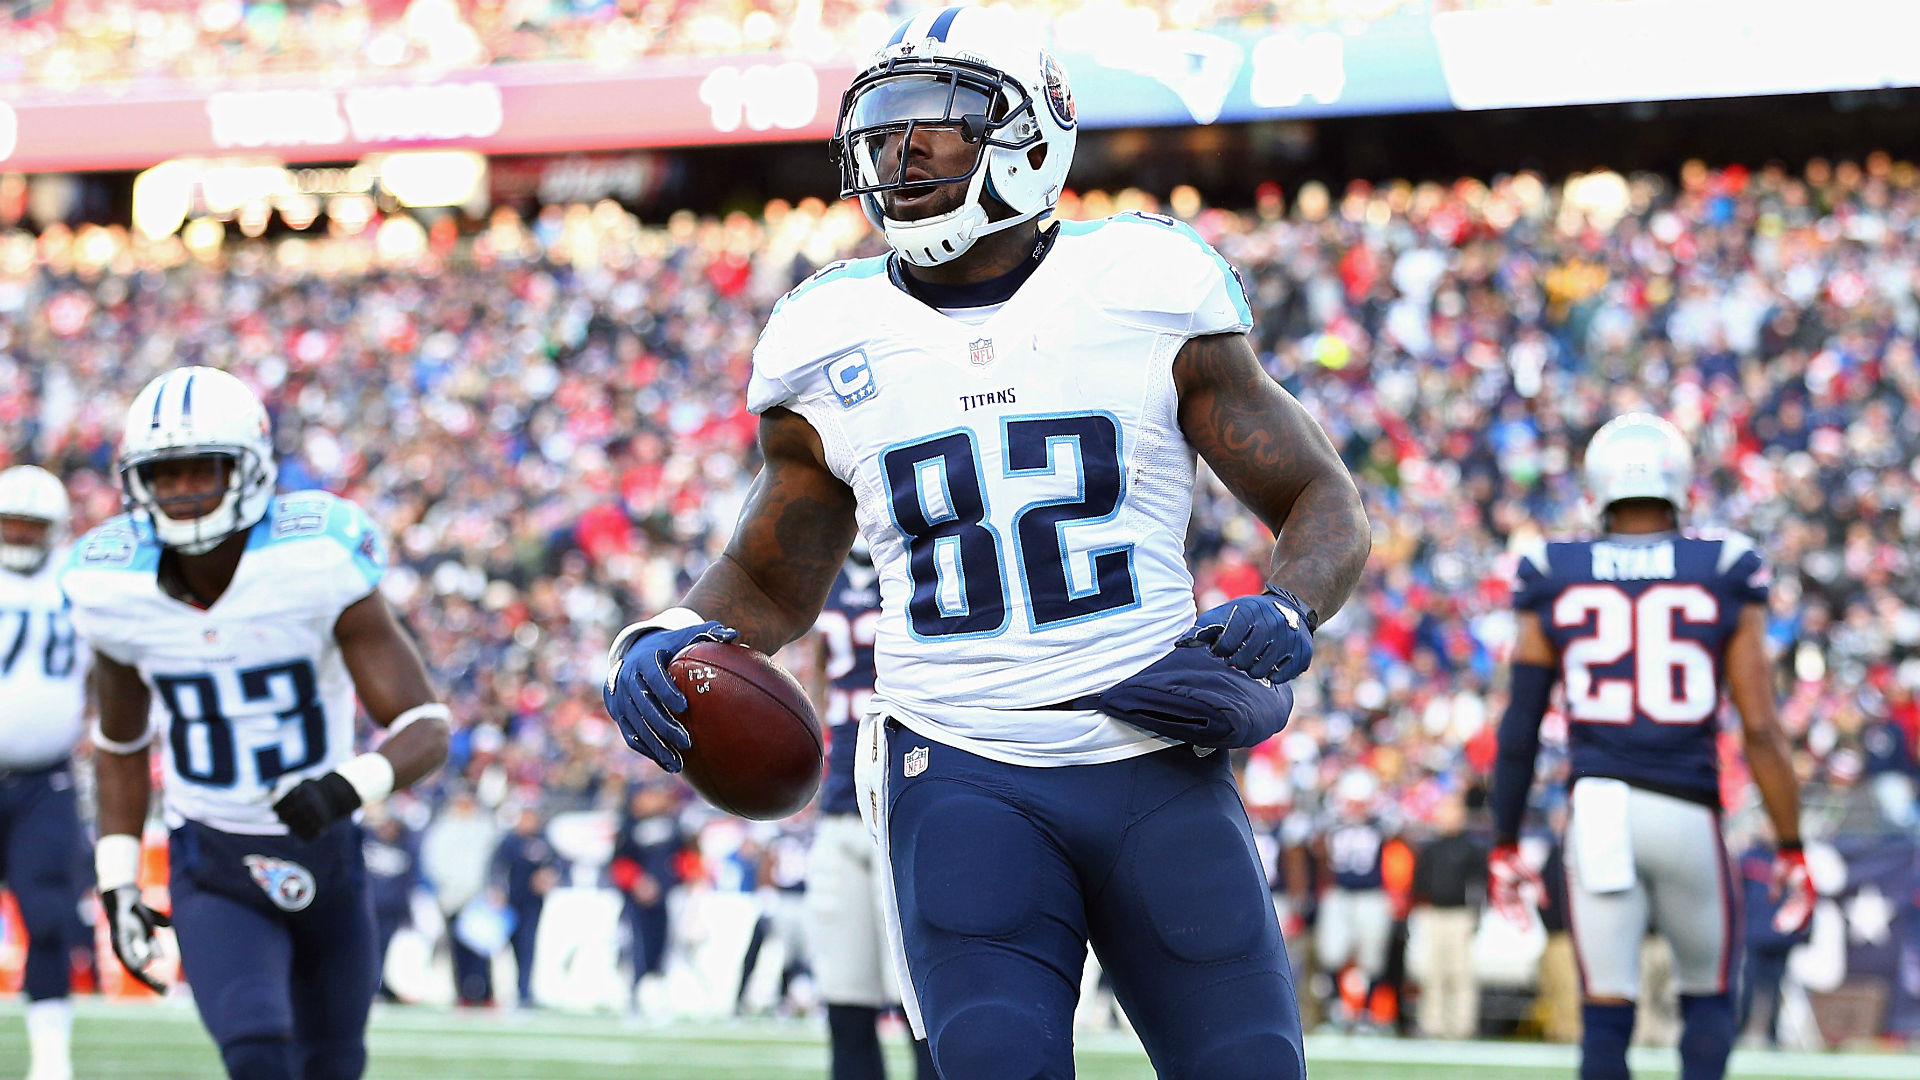 Delanie Walker, family have received death threats since his national anthem comments